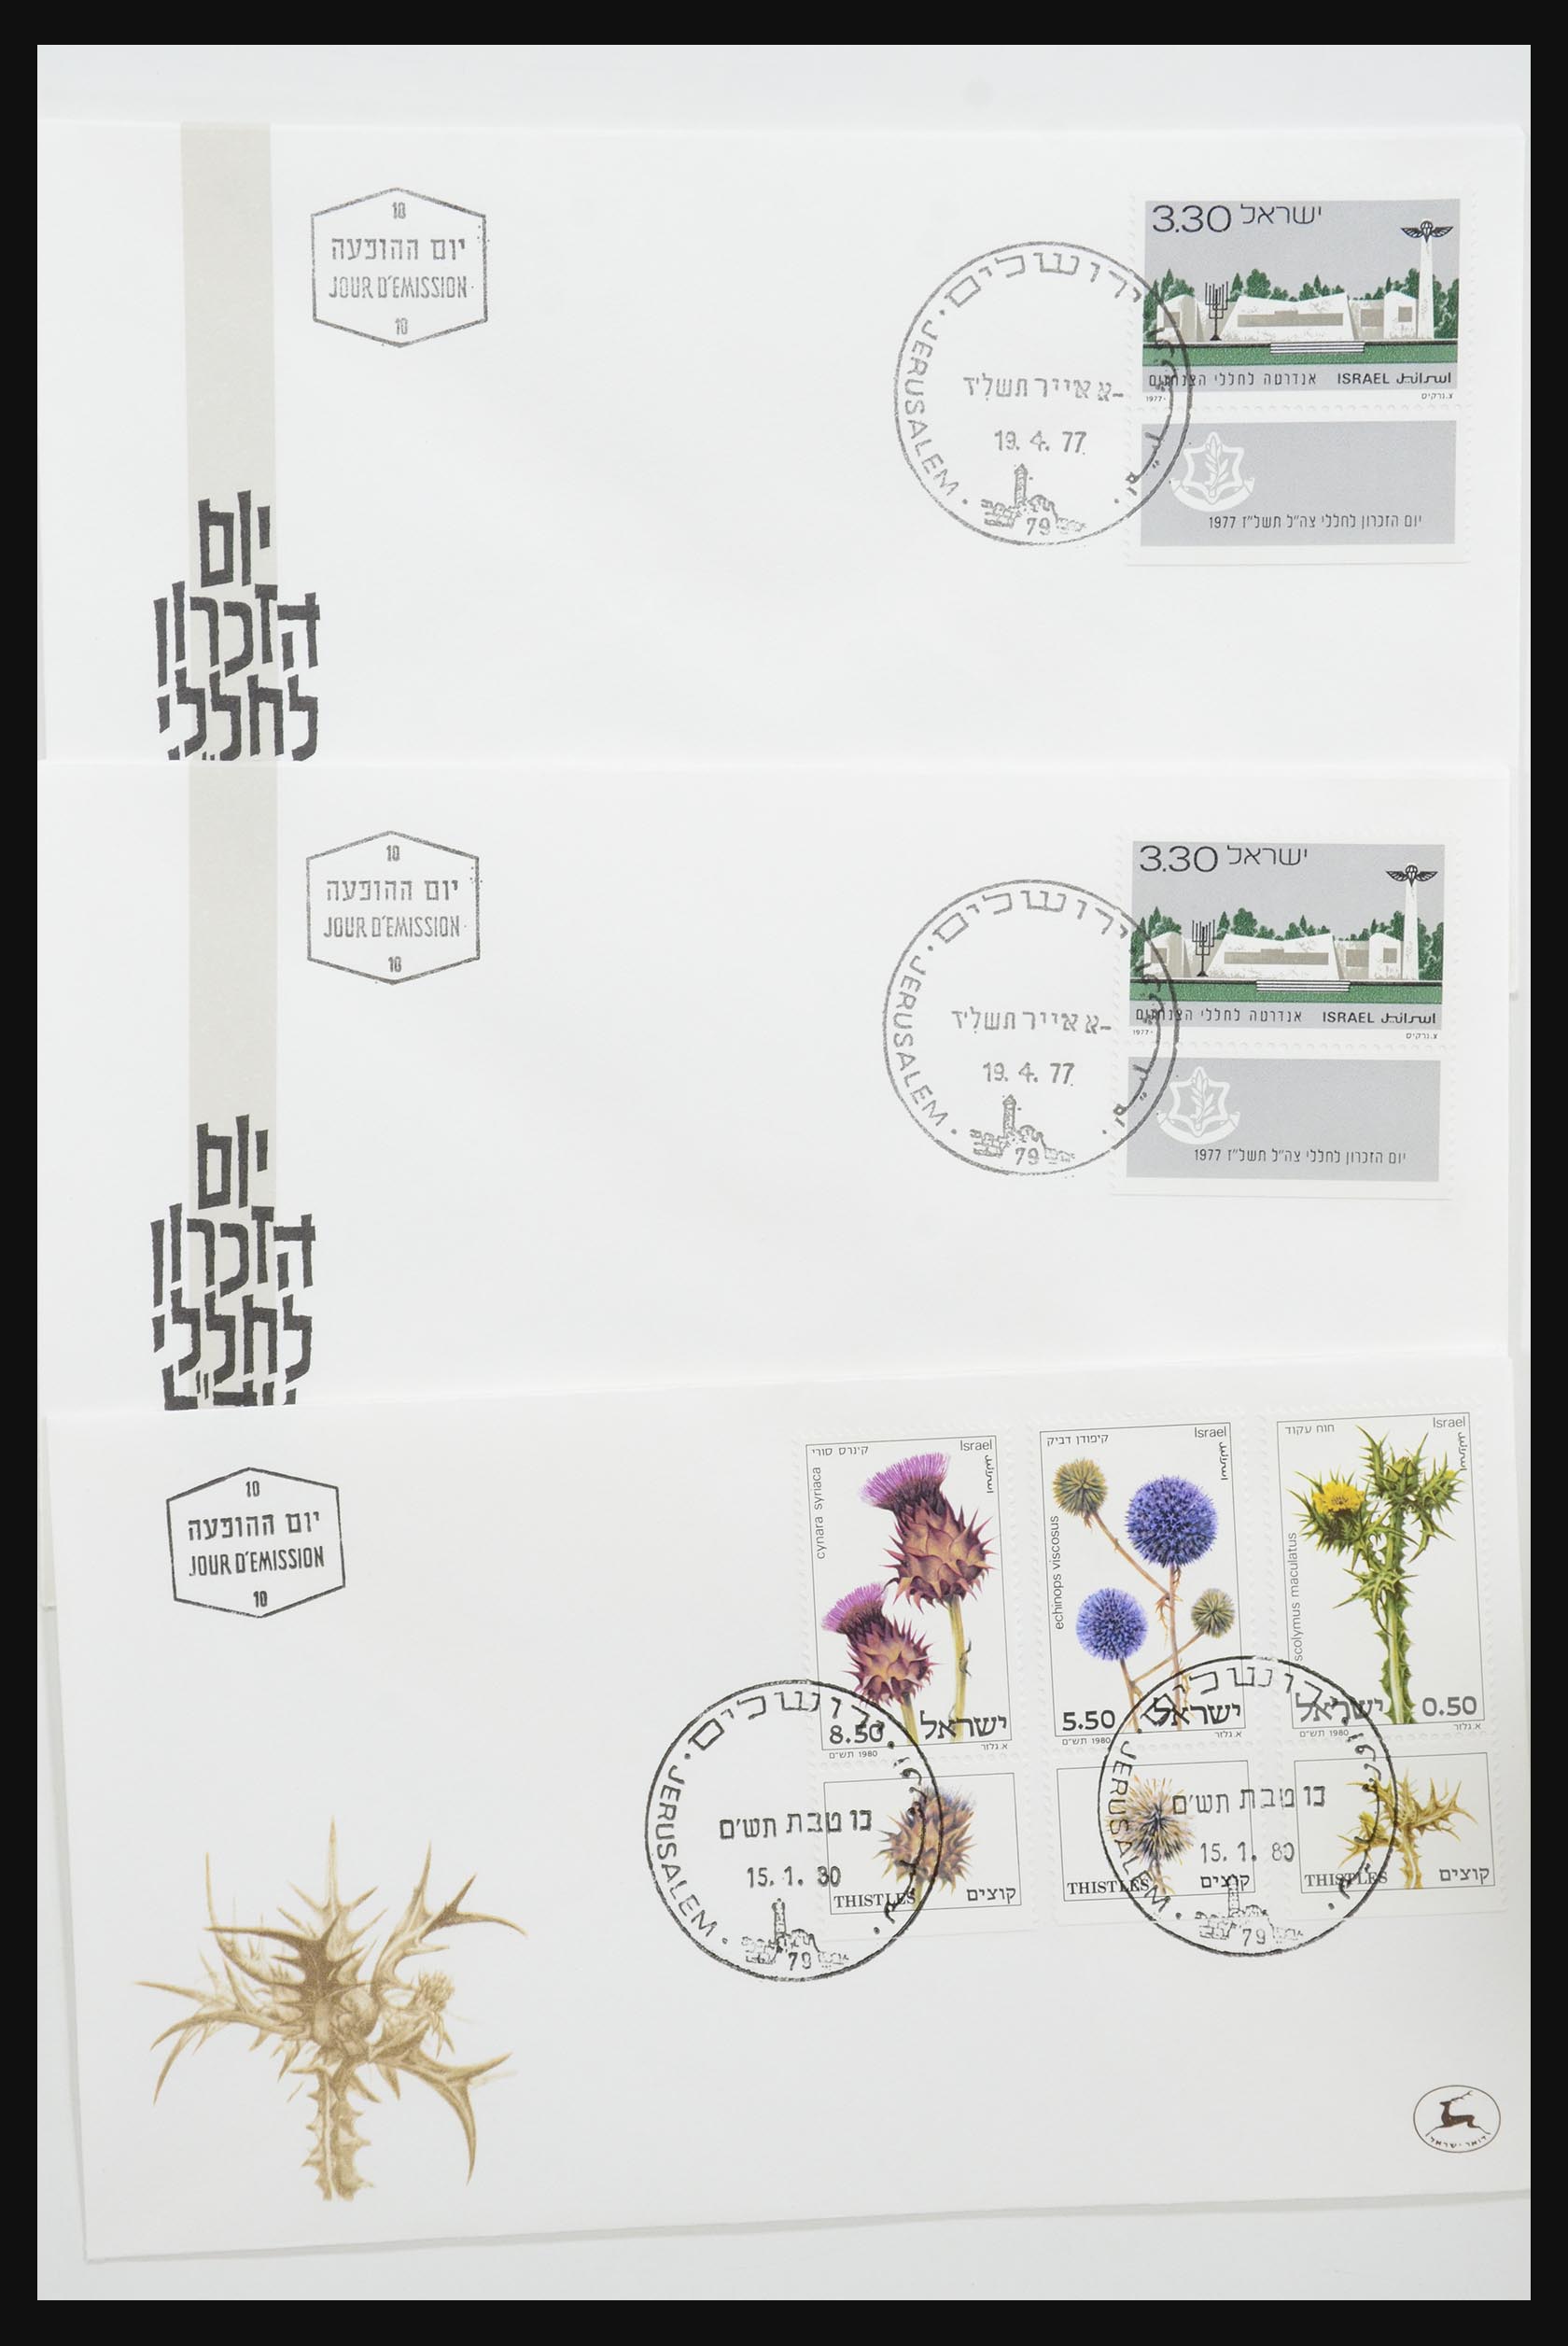 31924 011 - 31924 Israël fdc-collectie 1957-2003.